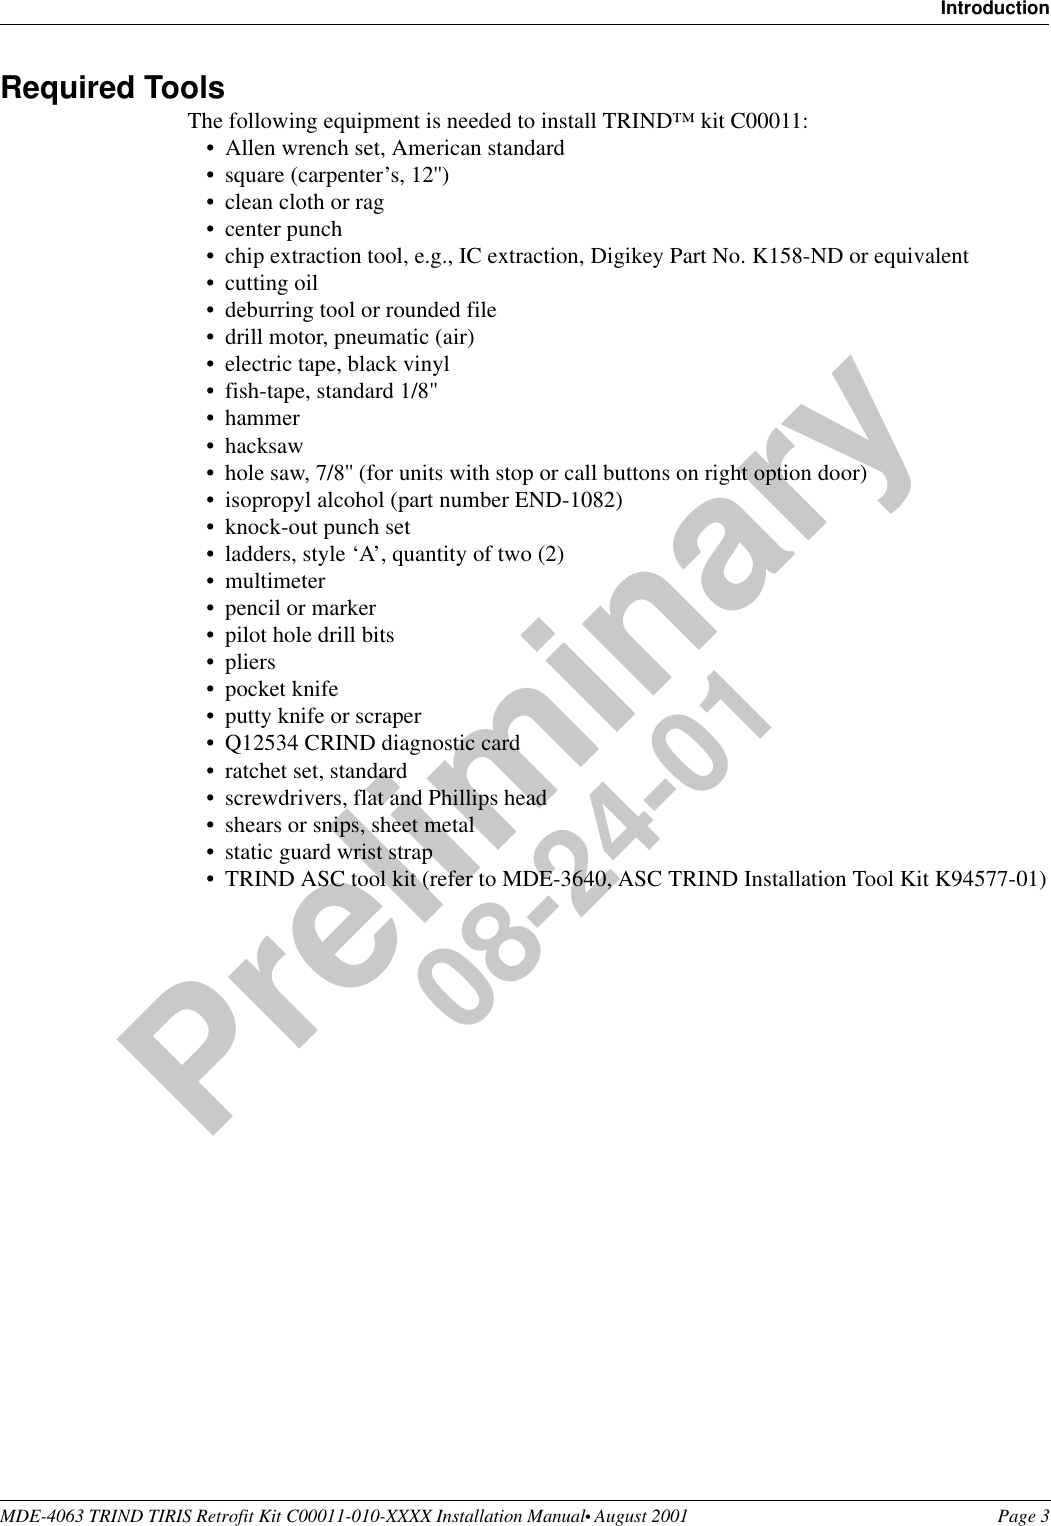 MDE-4063 TRIND TIRIS Retrofit Kit C00011-010-XXXX Installation Manual• August 2001 Page 3IntroductionPreliminary08-24-01Required ToolsThe following equipment is needed to install TRIND™ kit C00011:•Allen wrench set, American standard•square (carpenter’s, 12&apos;&apos;)•clean cloth or rag•center punch•chip extraction tool, e.g., IC extraction, Digikey Part No. K158-ND or equivalent•cutting oil•deburring tool or rounded file •drill motor, pneumatic (air)•electric tape, black vinyl•fish-tape, standard 1/8&quot; •hammer•hacksaw•hole saw, 7/8&apos;&apos; (for units with stop or call buttons on right option door)•isopropyl alcohol (part number END-1082)•knock-out punch set•ladders, style ‘A’, quantity of two (2) •multimeter•pencil or marker •pilot hole drill bits•pliers•pocket knife•putty knife or scraper•Q12534 CRIND diagnostic card•ratchet set, standard•screwdrivers, flat and Phillips head•shears or snips, sheet metal•static guard wrist strap•TRIND ASC tool kit (refer to MDE-3640, ASC TRIND Installation Tool Kit K94577-01)